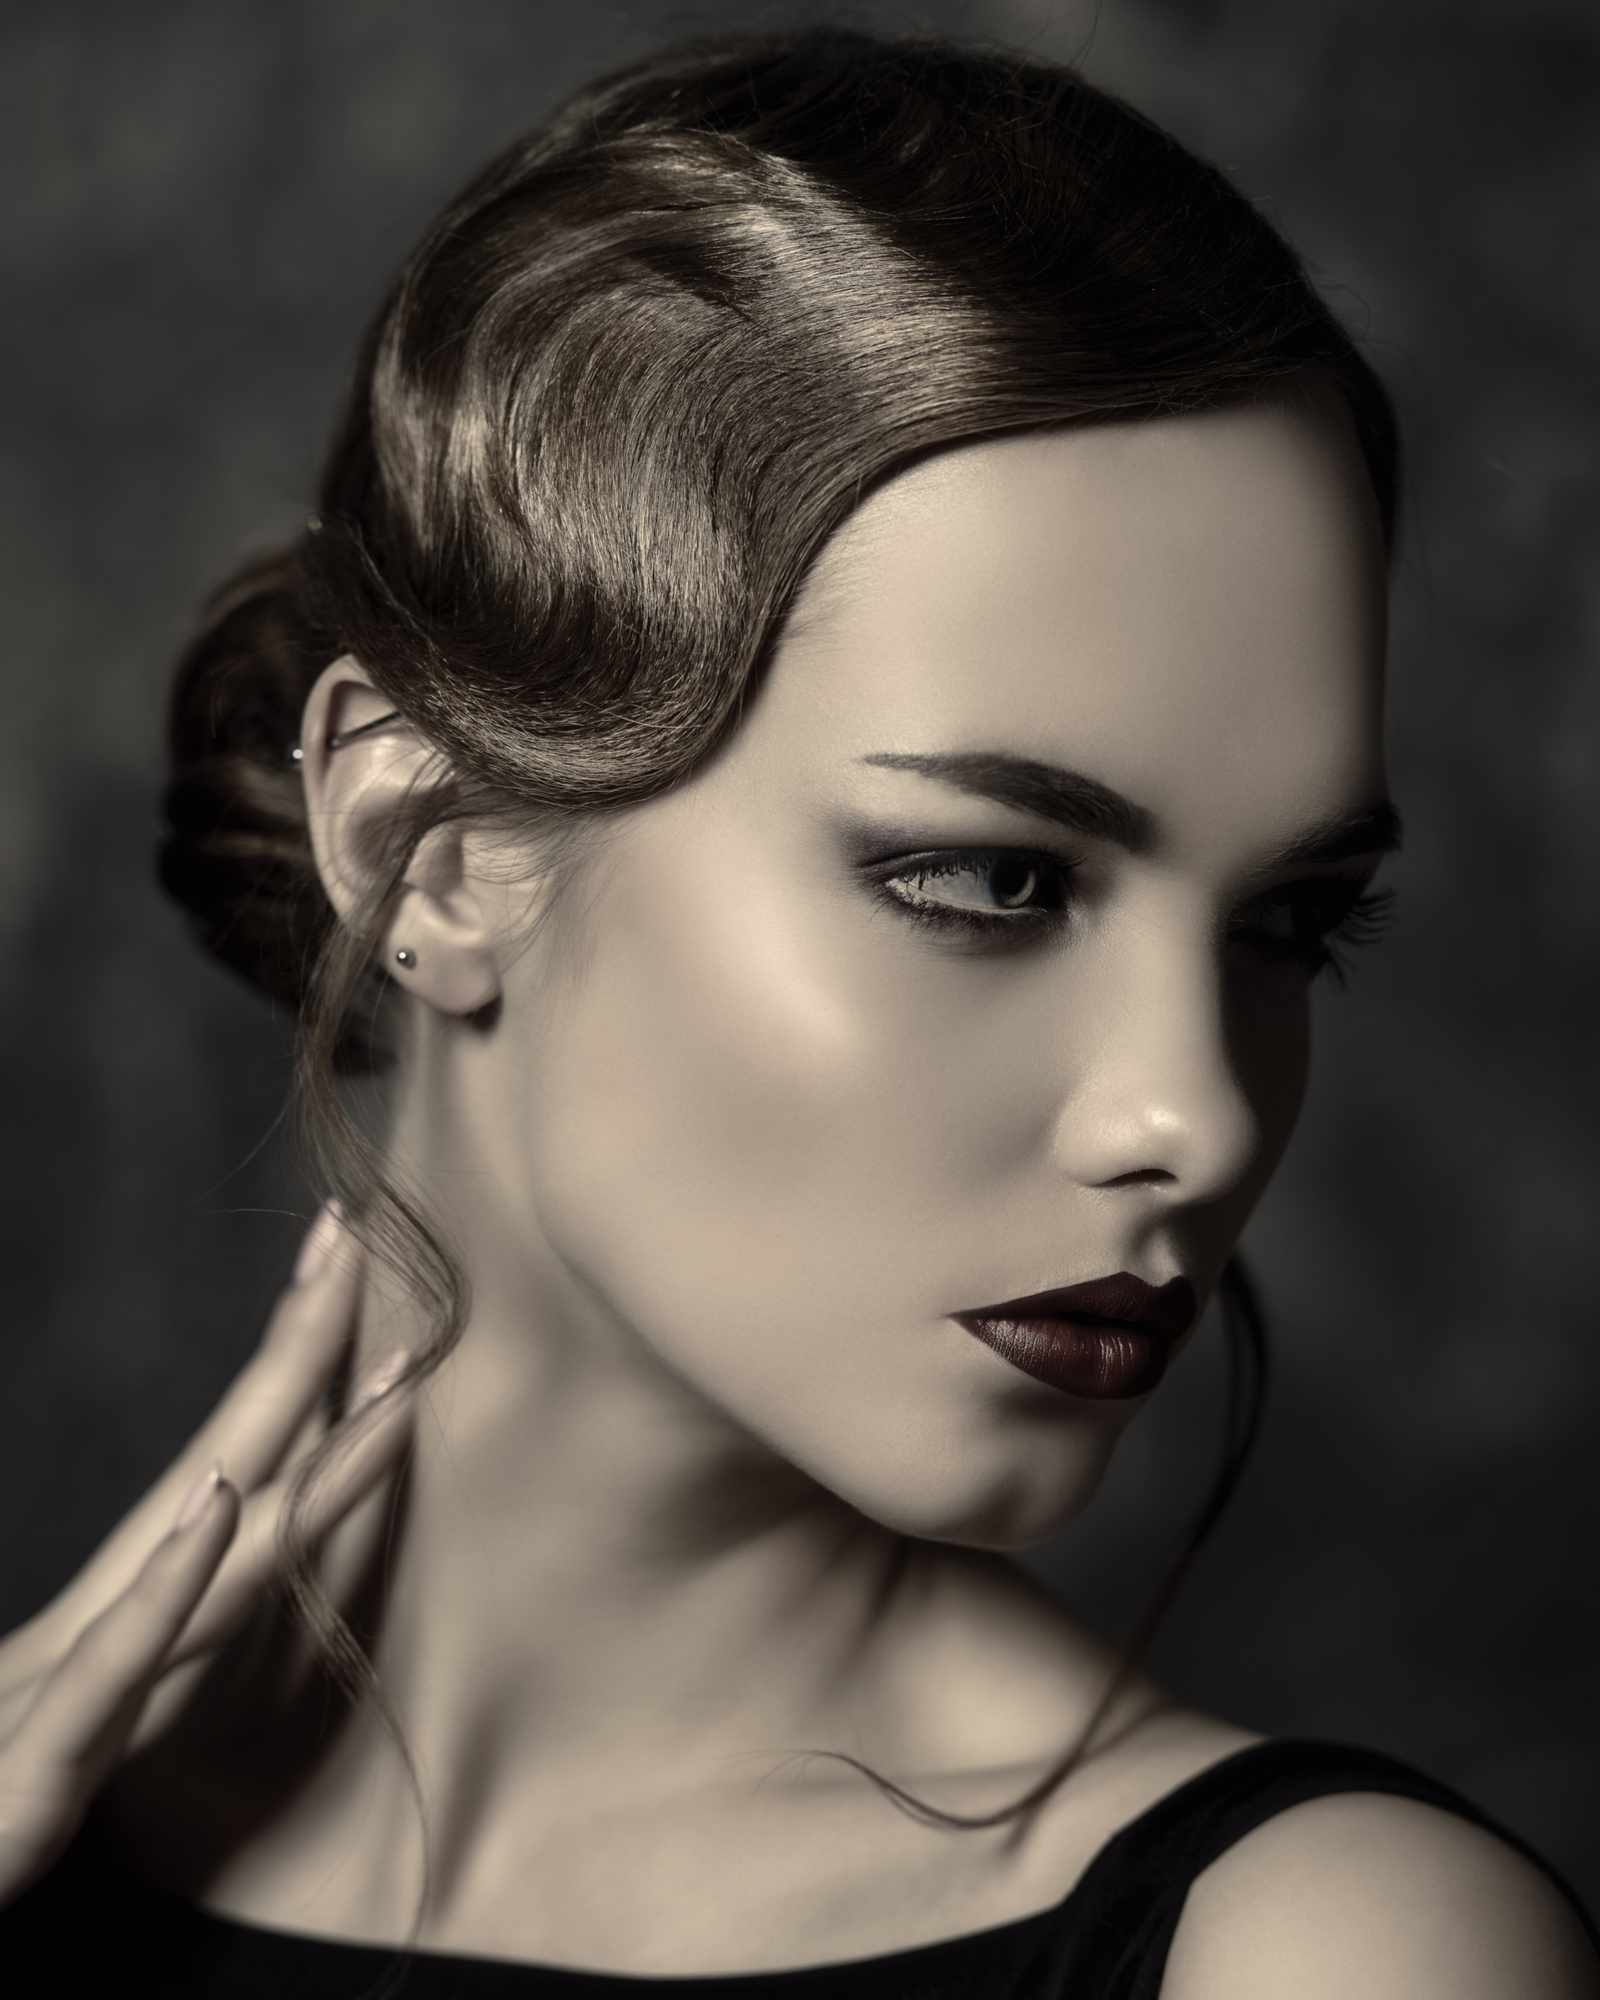 Classic Sleek Finger Waves With Low Bun on a woman in a black and white image